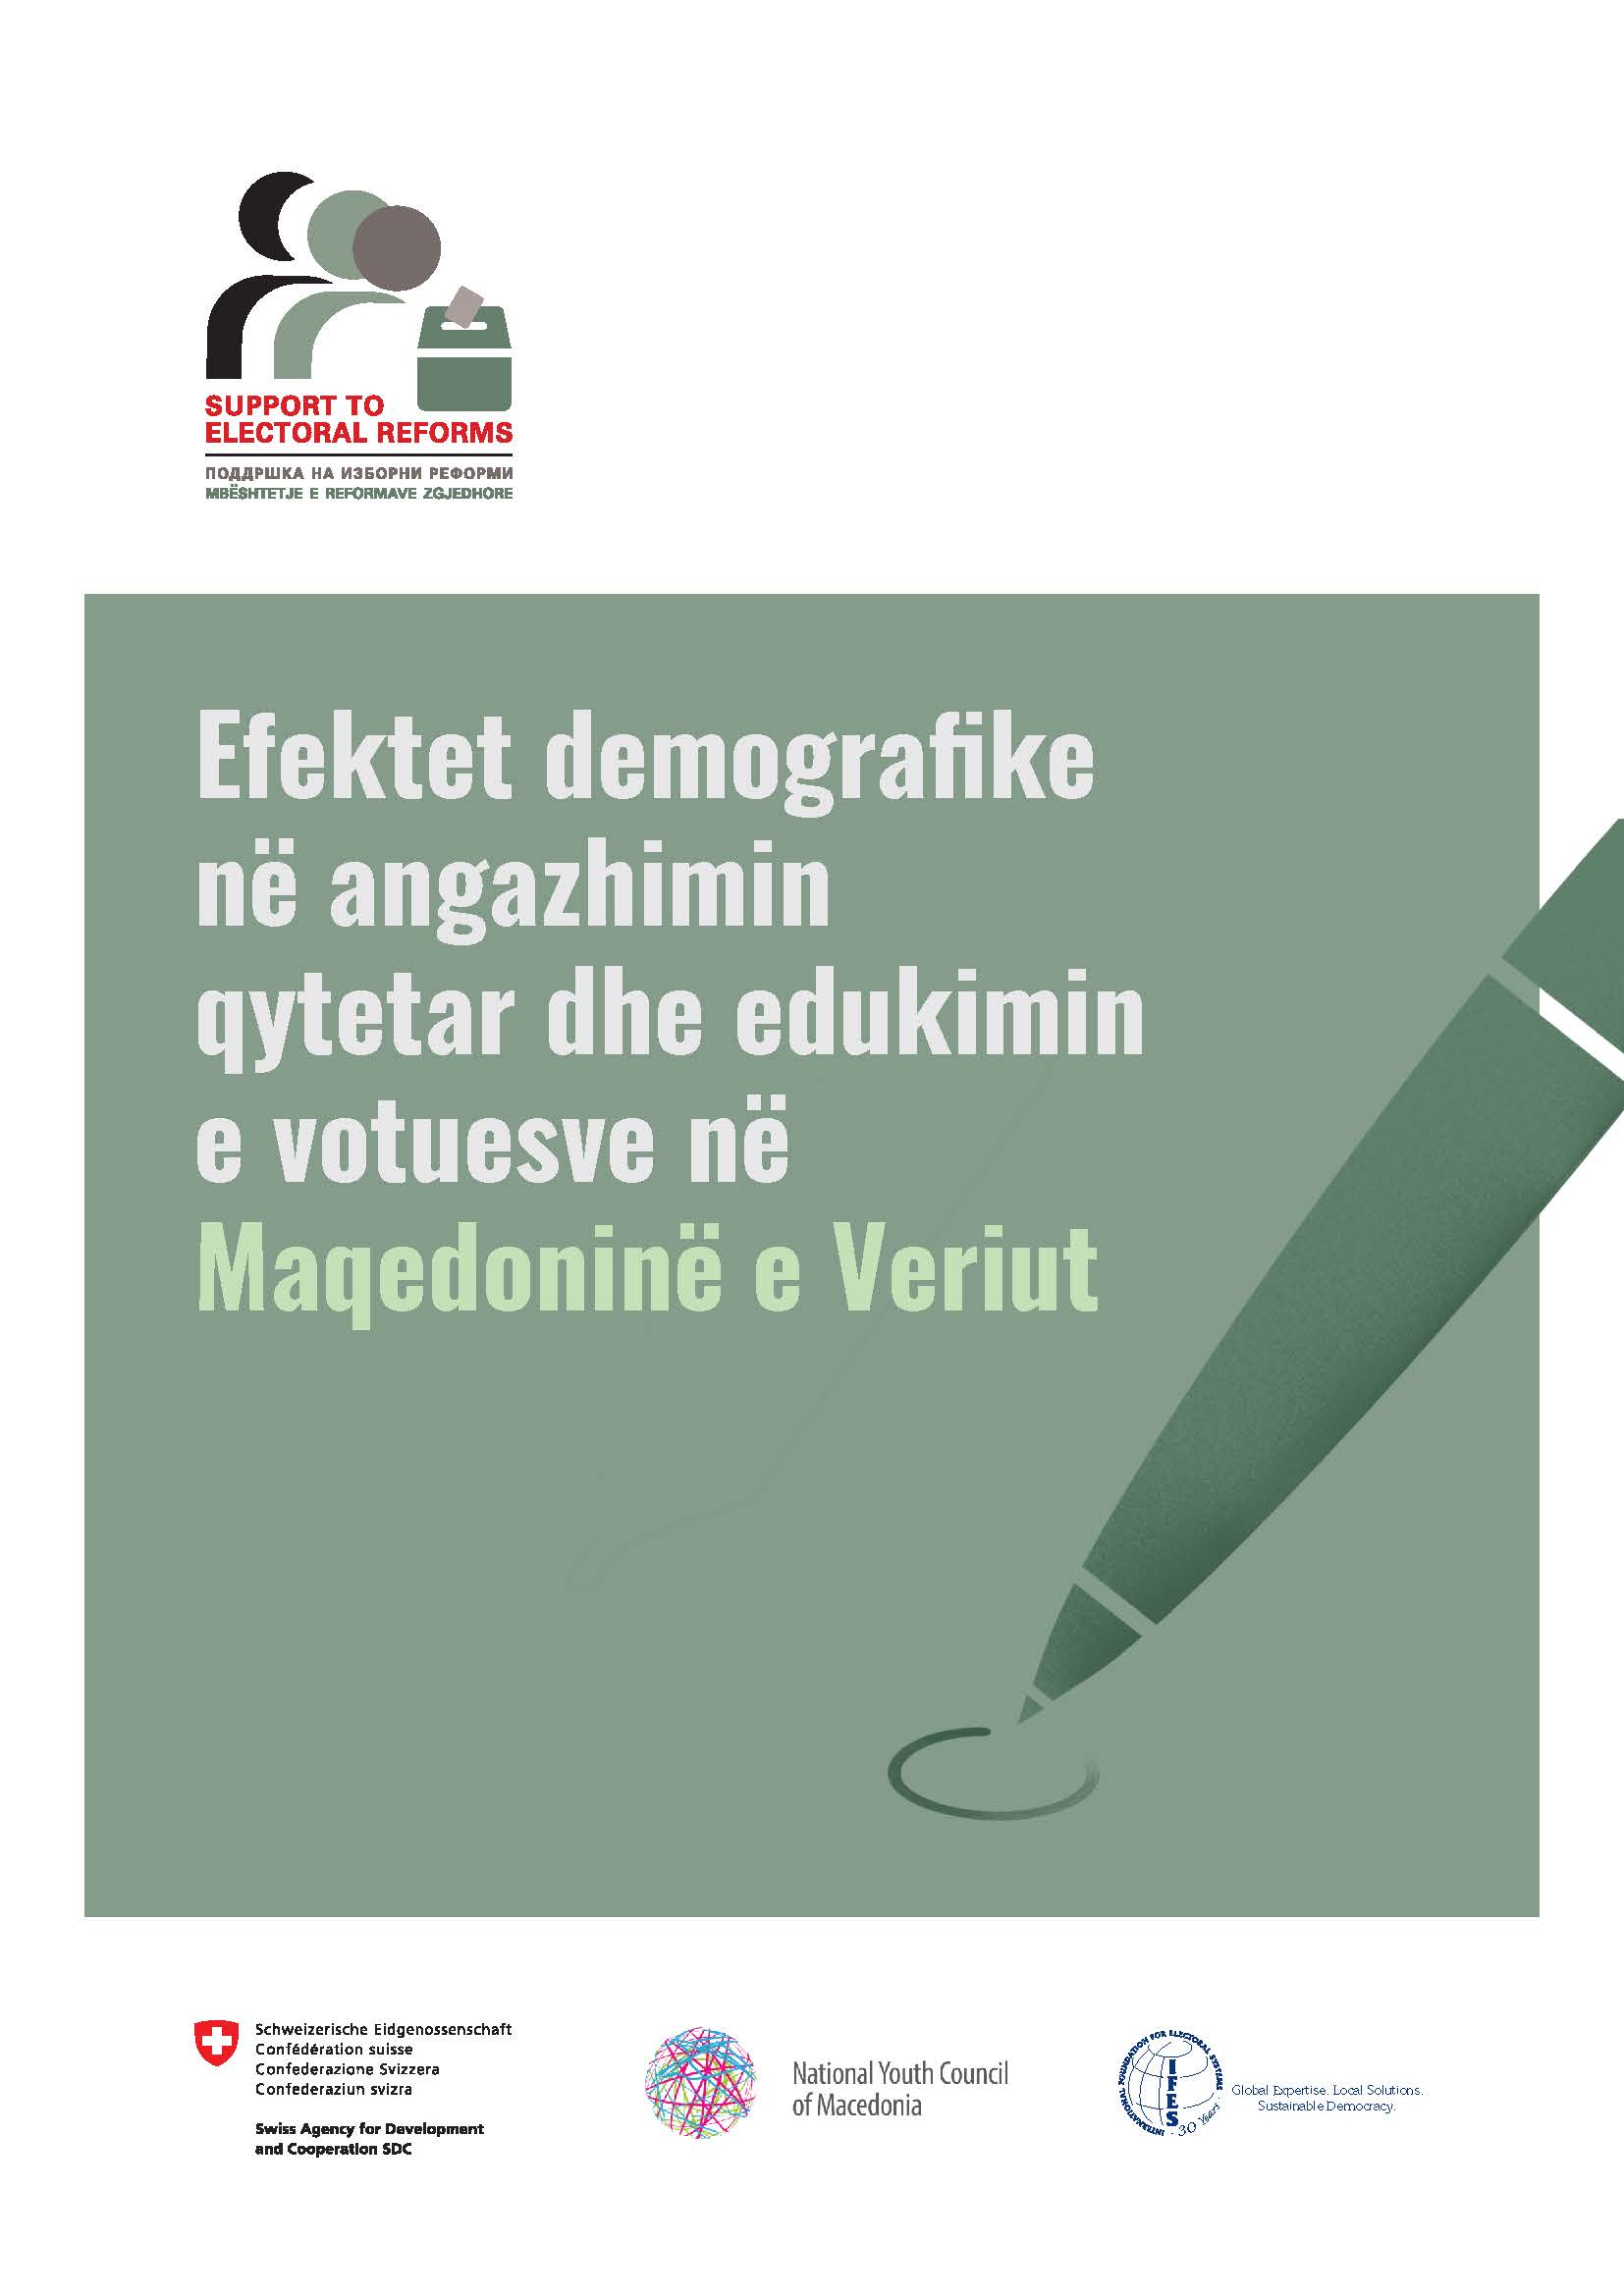 Demographic effects on citizen engagement in public life and voter education in North Macedonia